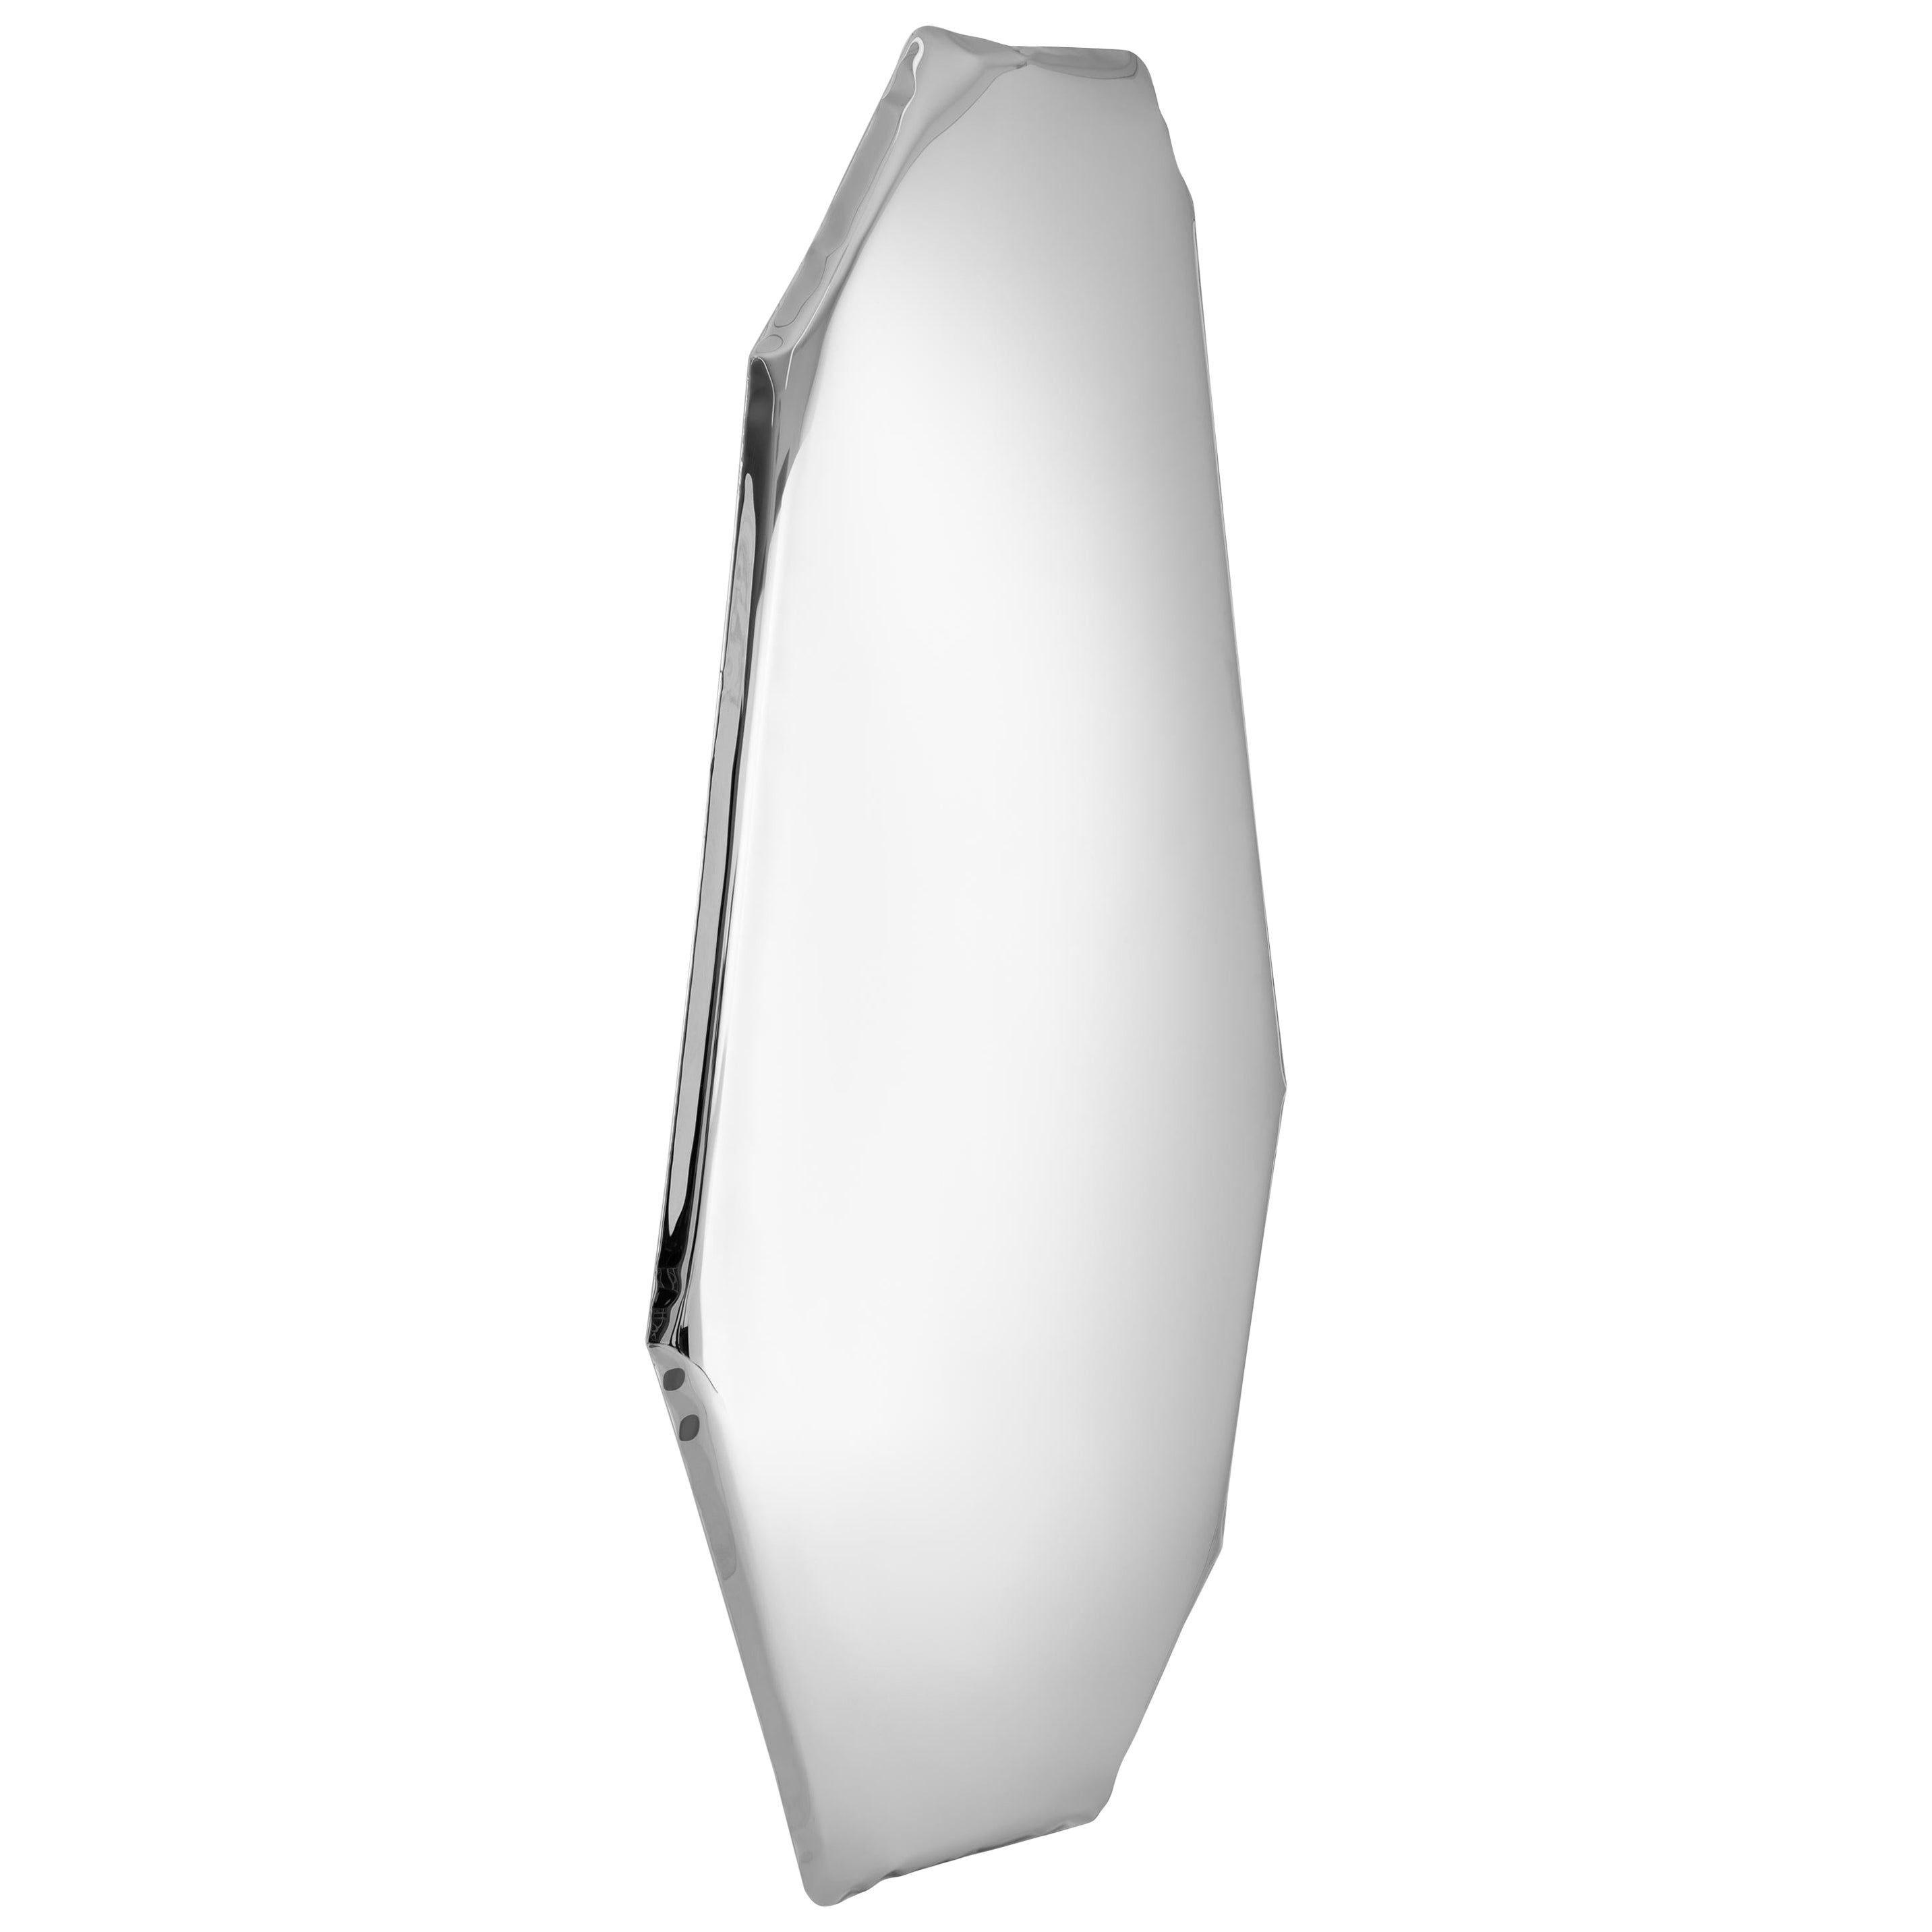 Stainless Steel Tafla C1 Sculptural Wall Mirror by Zieta For Sale